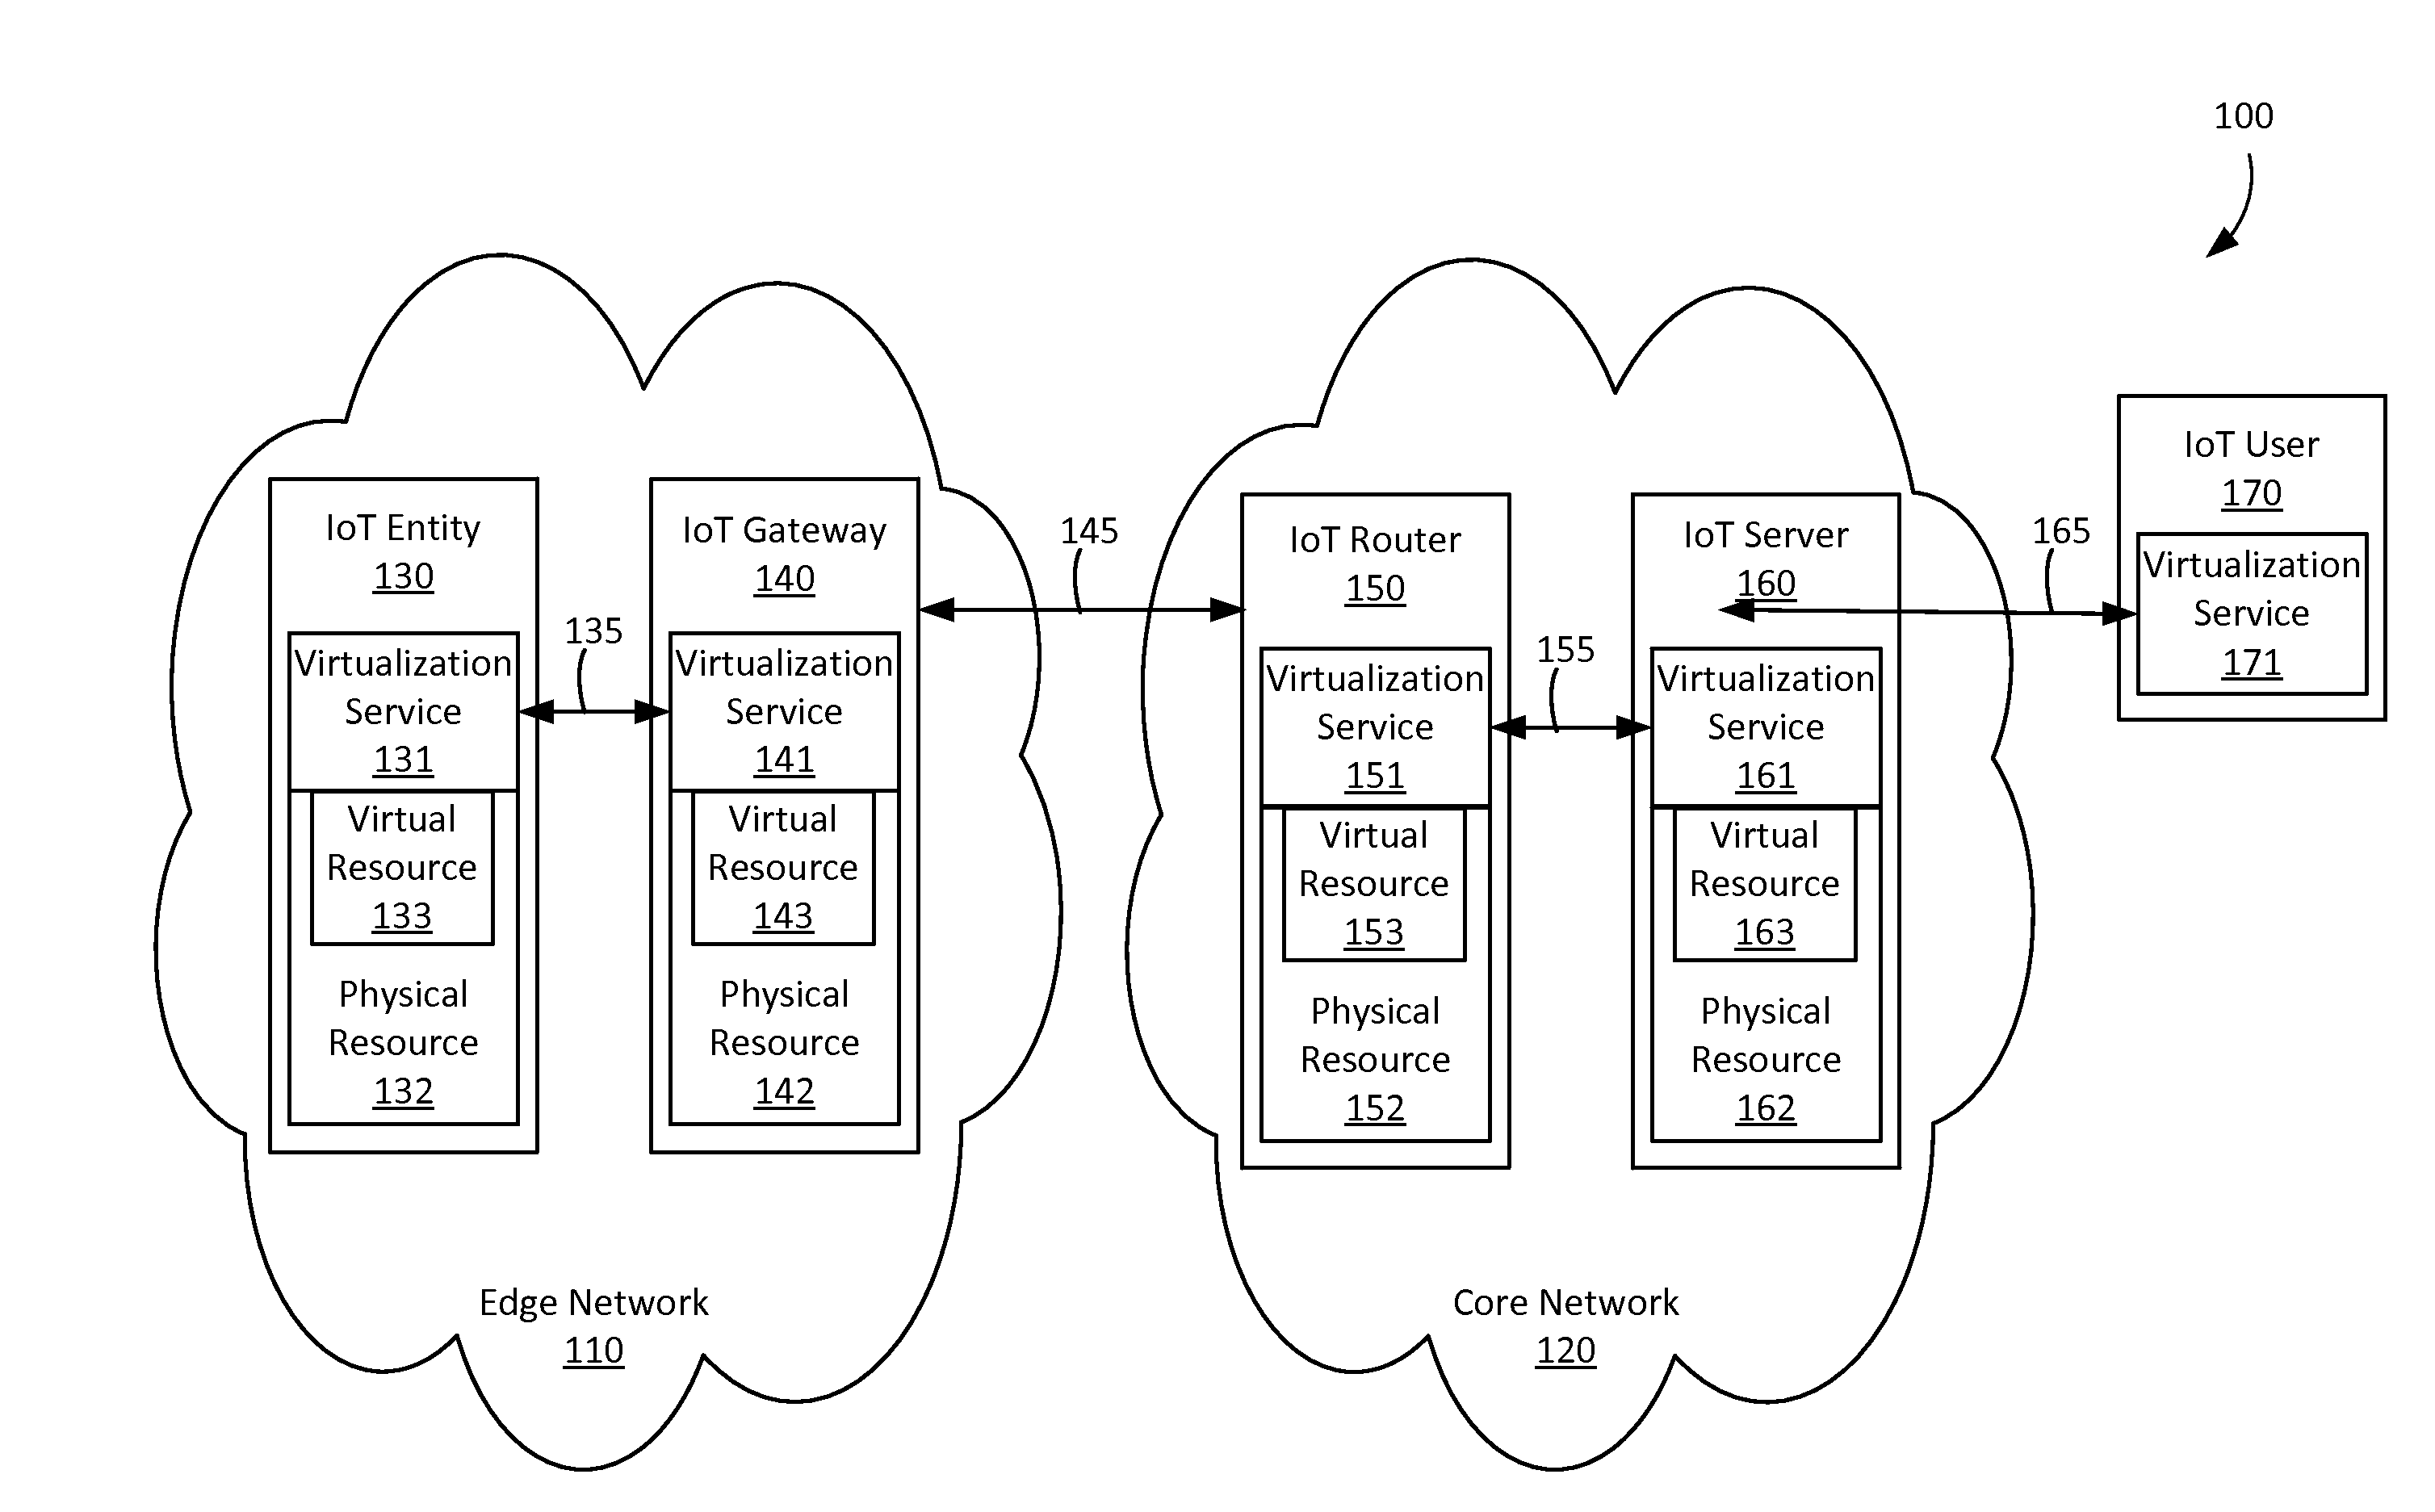 Method and apparatus for the virtualization of resources using a virtualization broker and context information